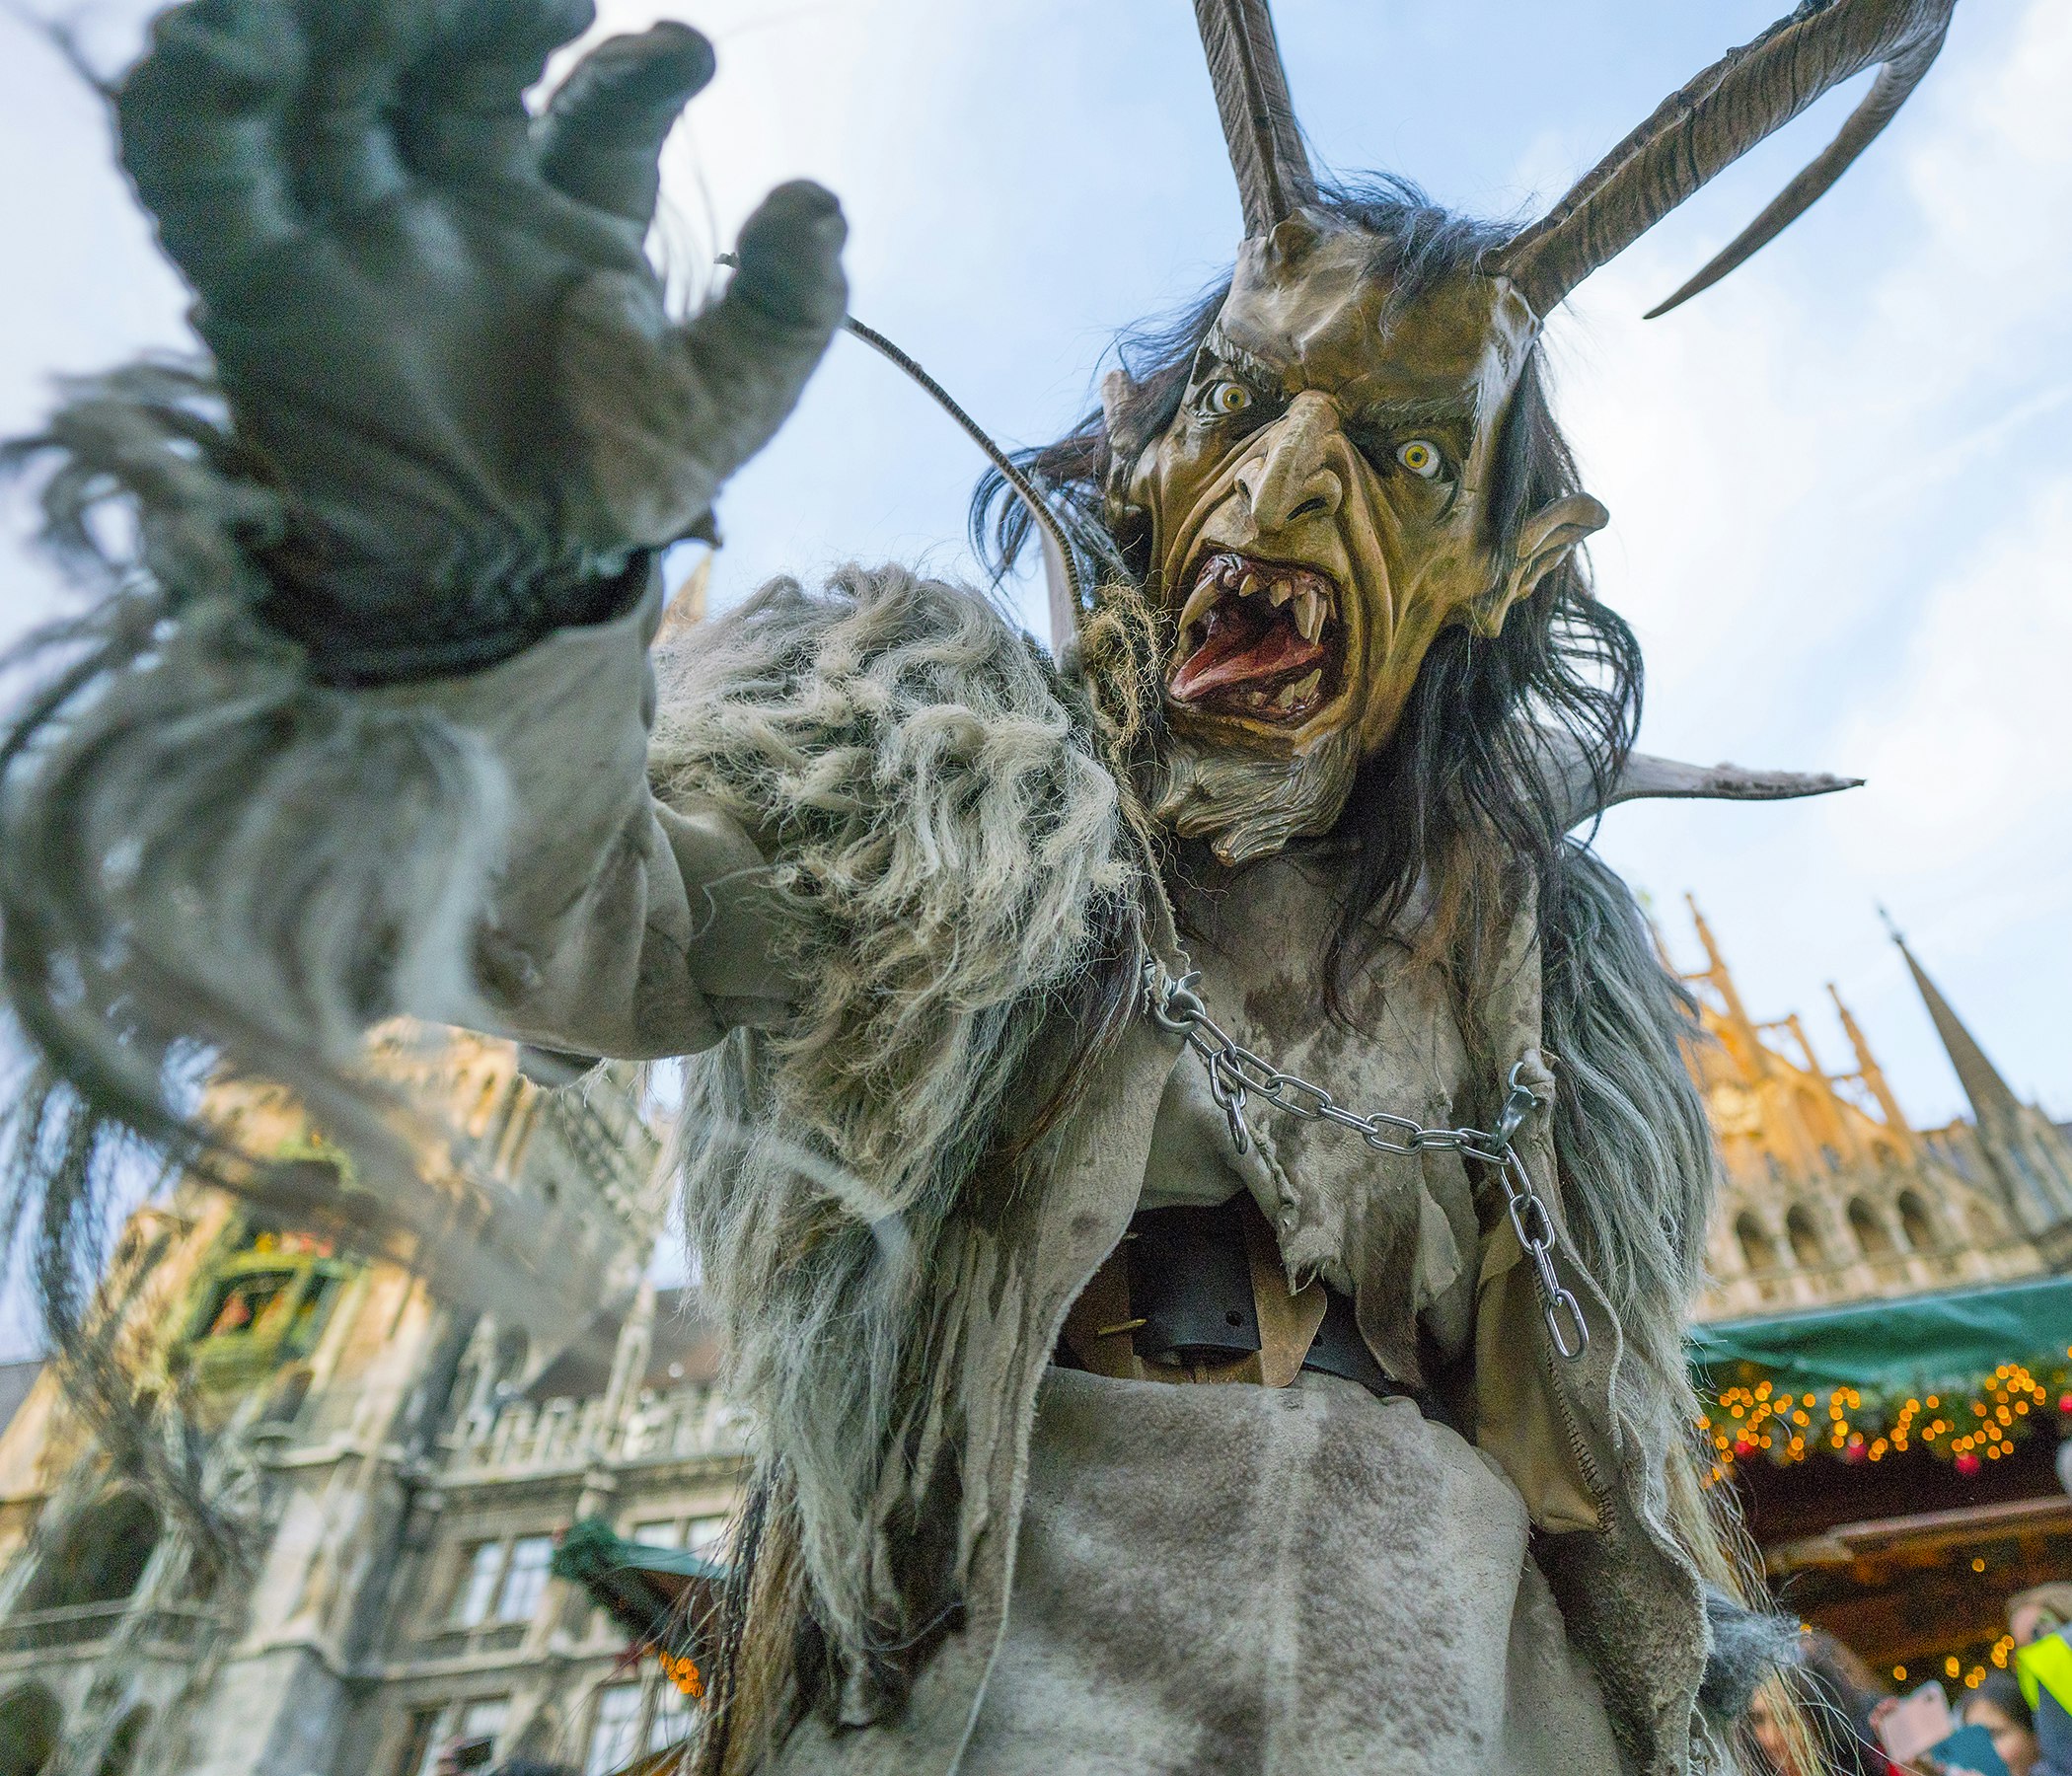 A person dressed as Krampus, the Christmas demon, reaches for the camera while exposing a large tongue and pointy teeth. The Krampus costume also features two large horns protruding from the head and a hairy body  